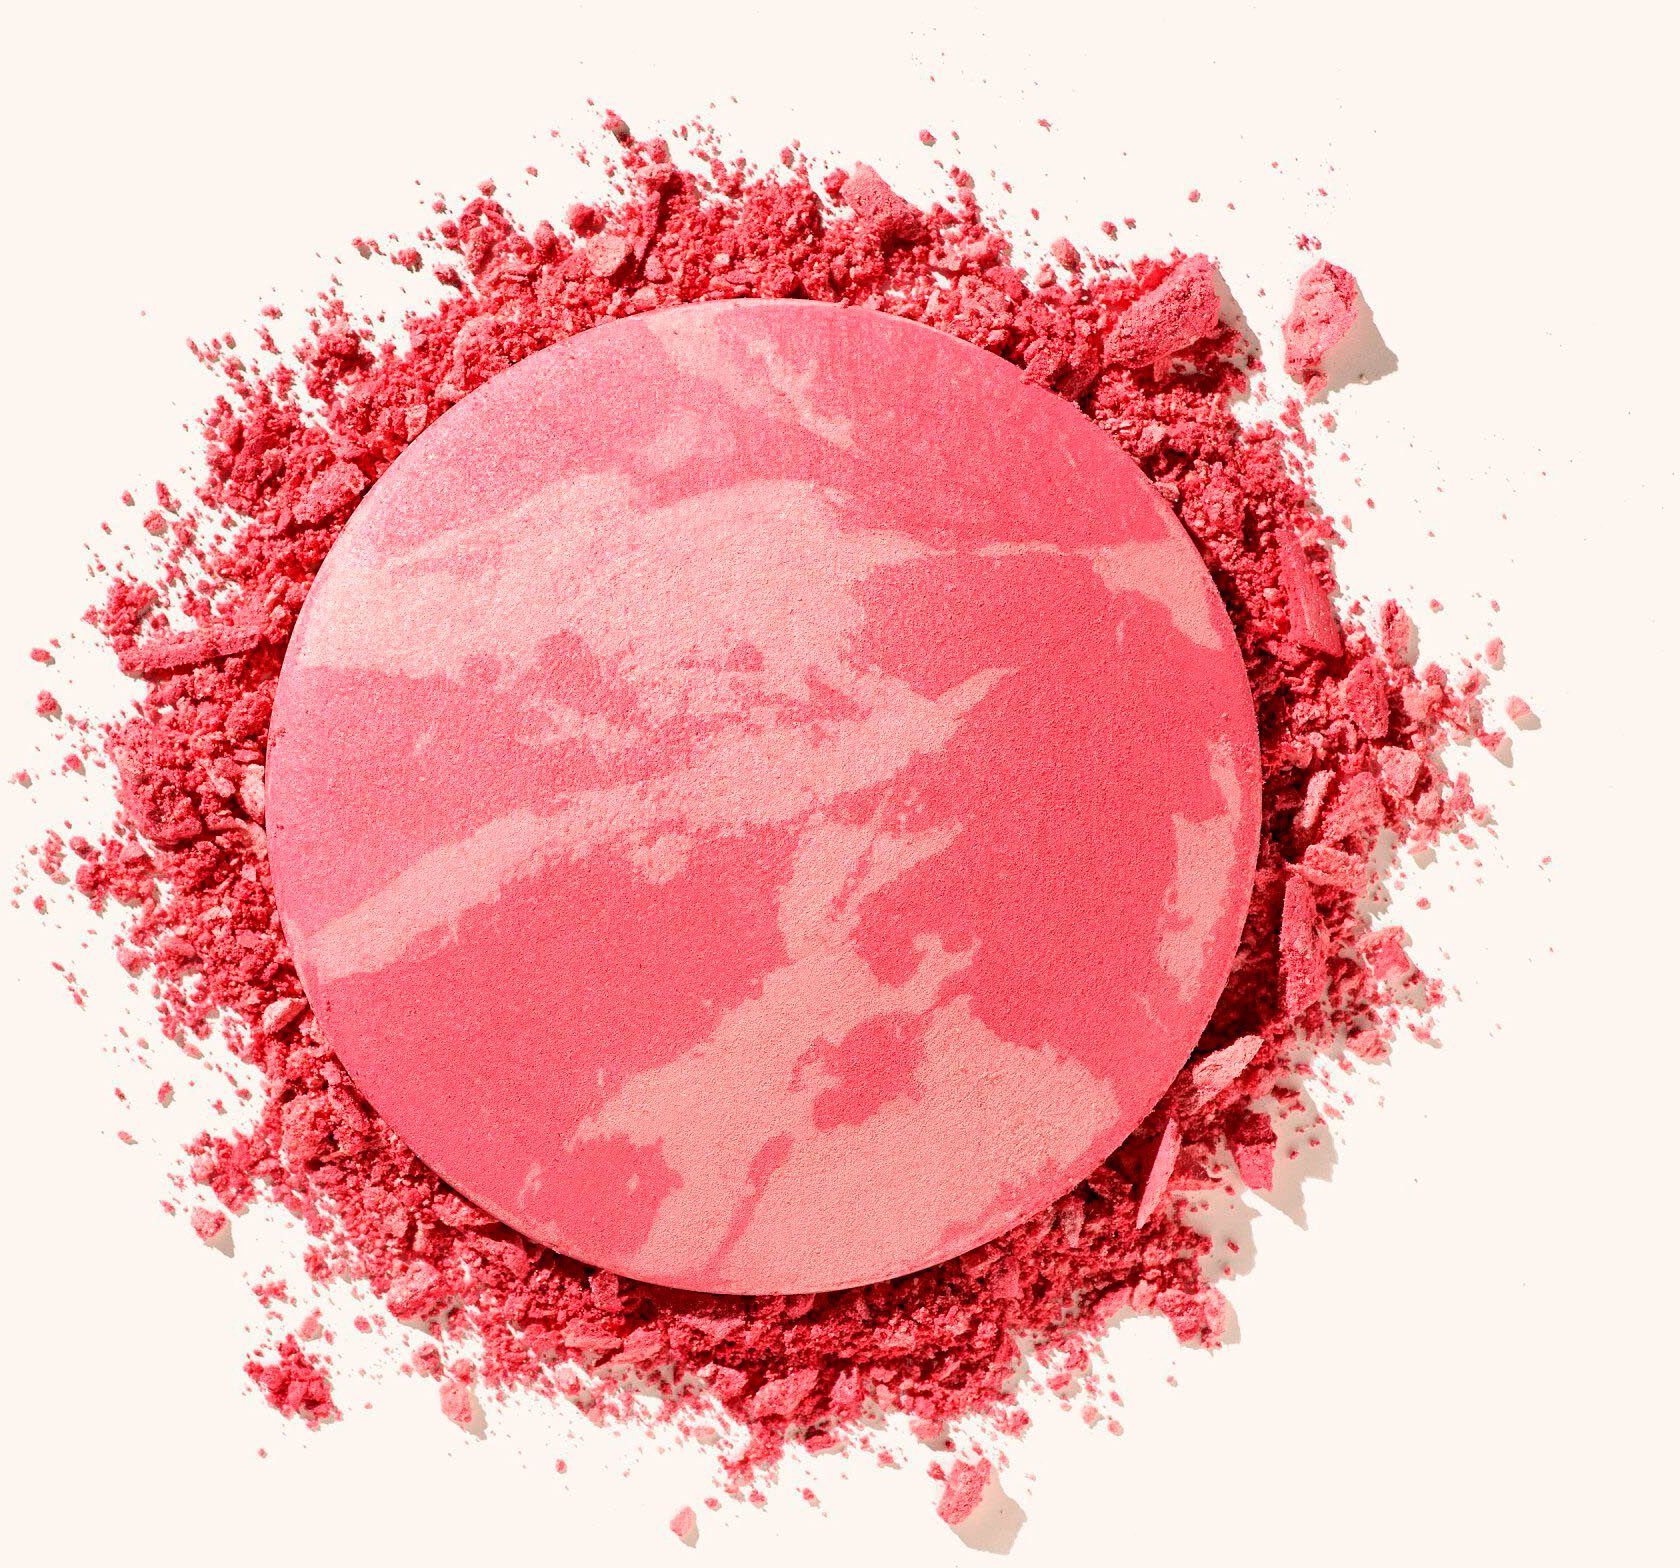 Catrice Marbled 3-tlg. Rouge Lover Cheek Blush,